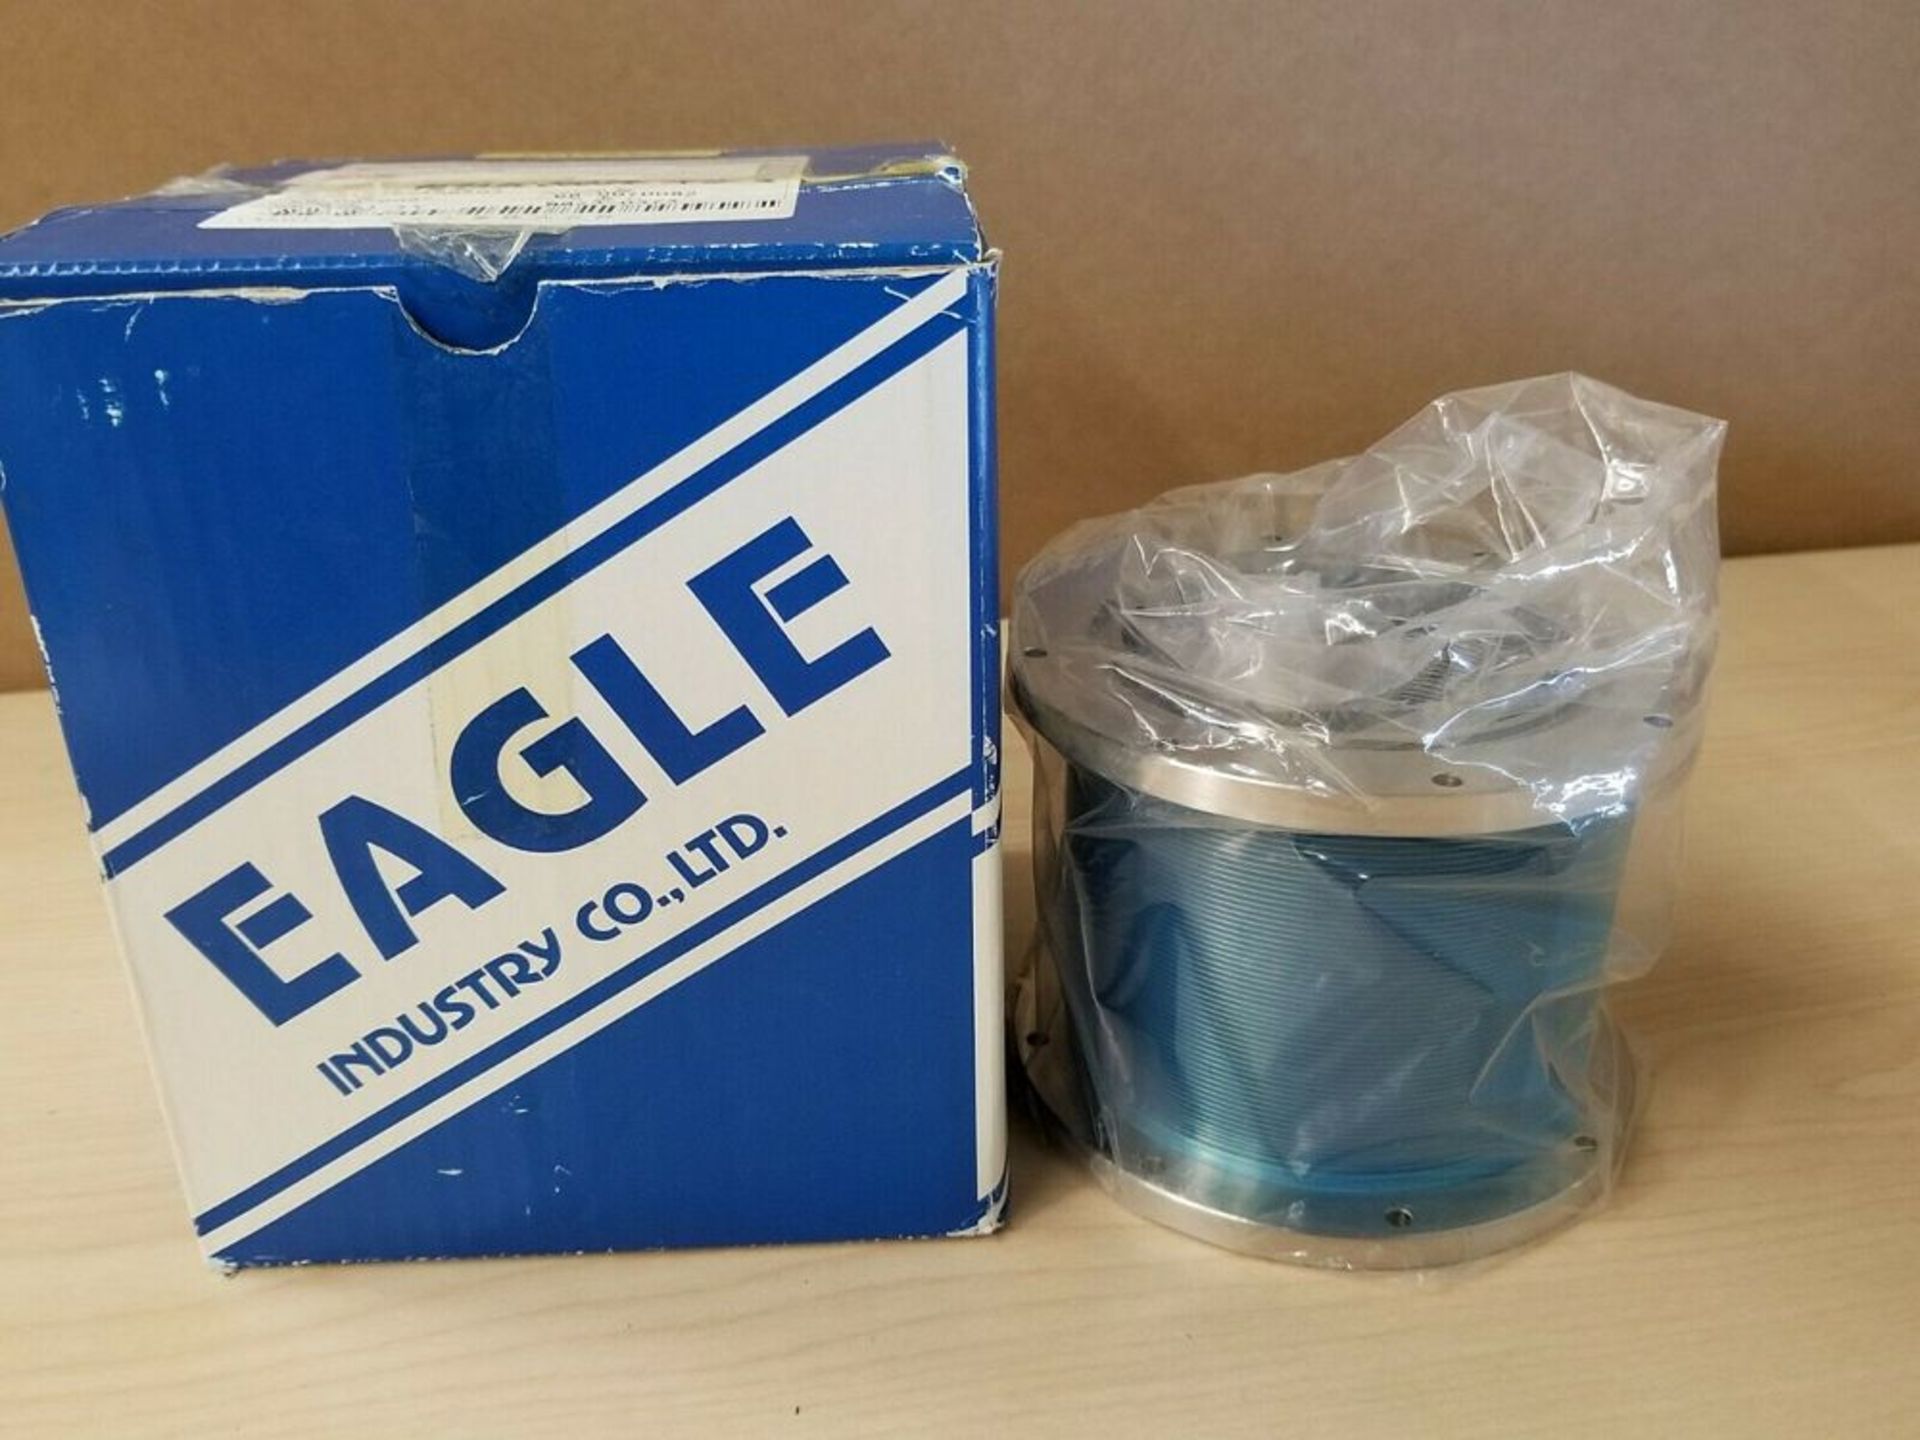 NEW EAGLE STAINLESS STEEL VACUUM BELLOWS FLANGE